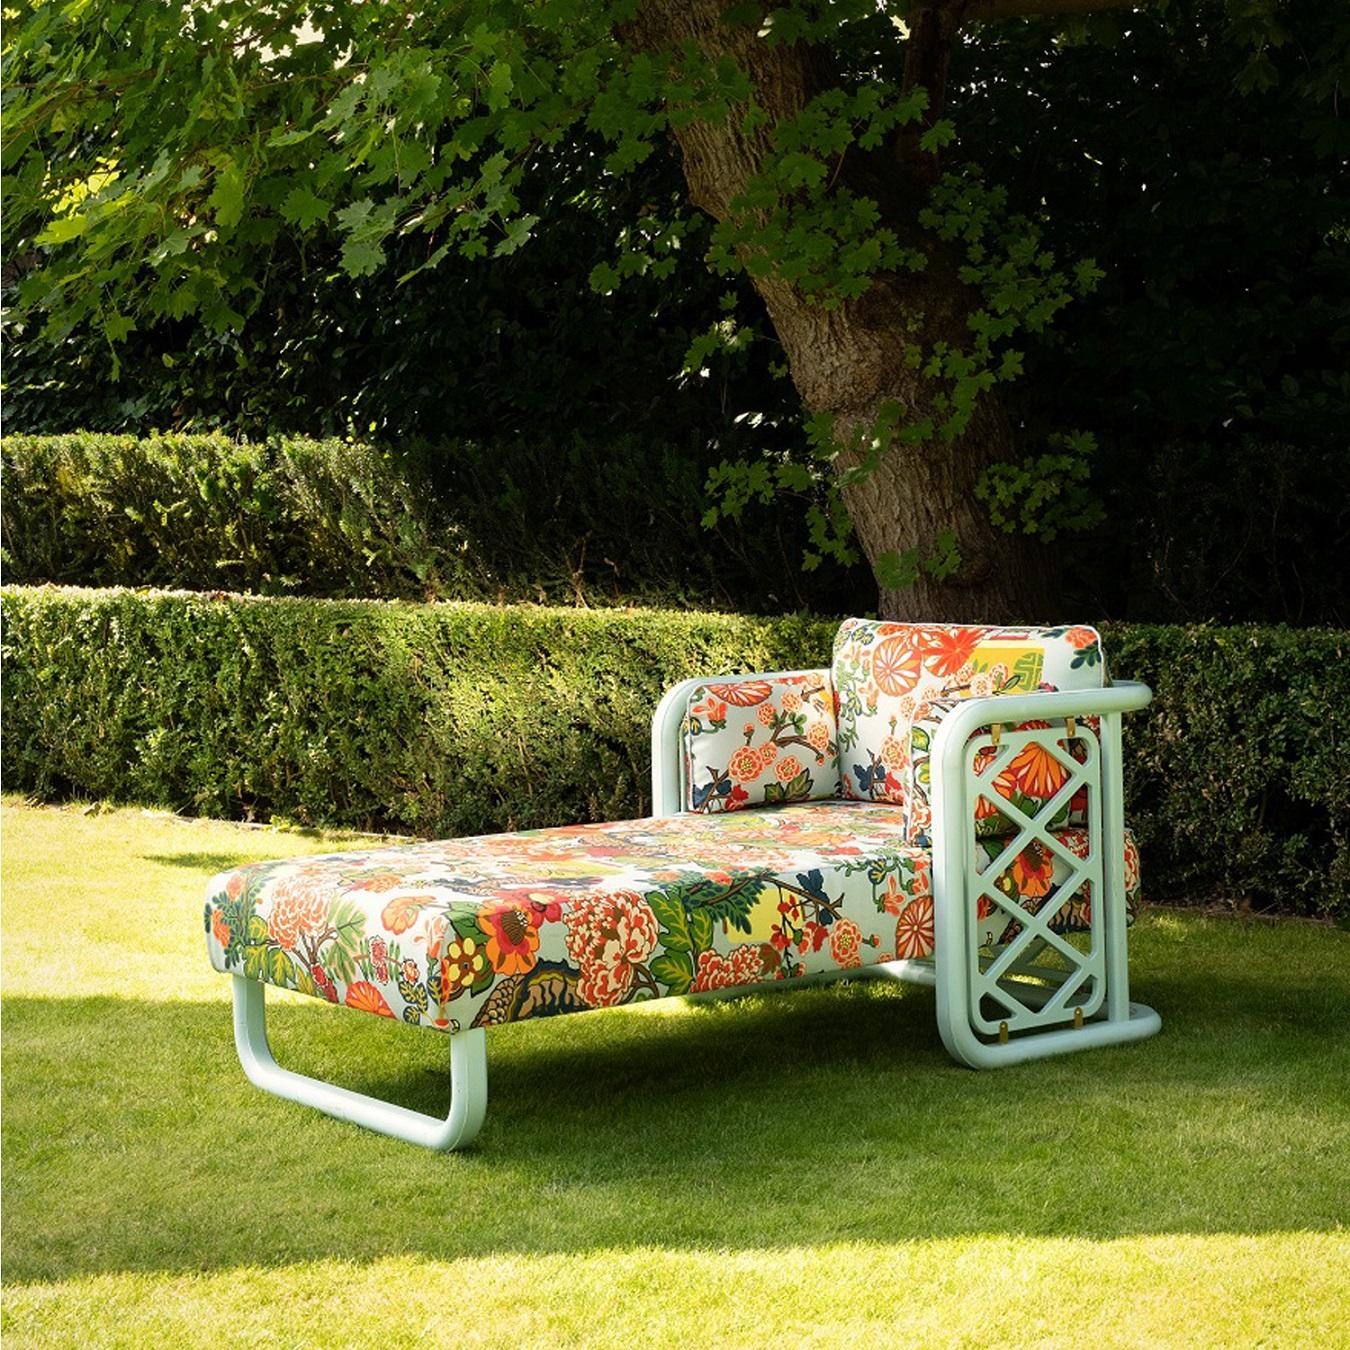 Aquamarine lacquered beech structure, decorative panels with trellis design. Outdoor coating. 1 backrest cushion and 2 armrest cushions. 
It is a piece of furniture made by hand by the craftsmen of Moissonnier, French cabinetmaker since 1885. Our